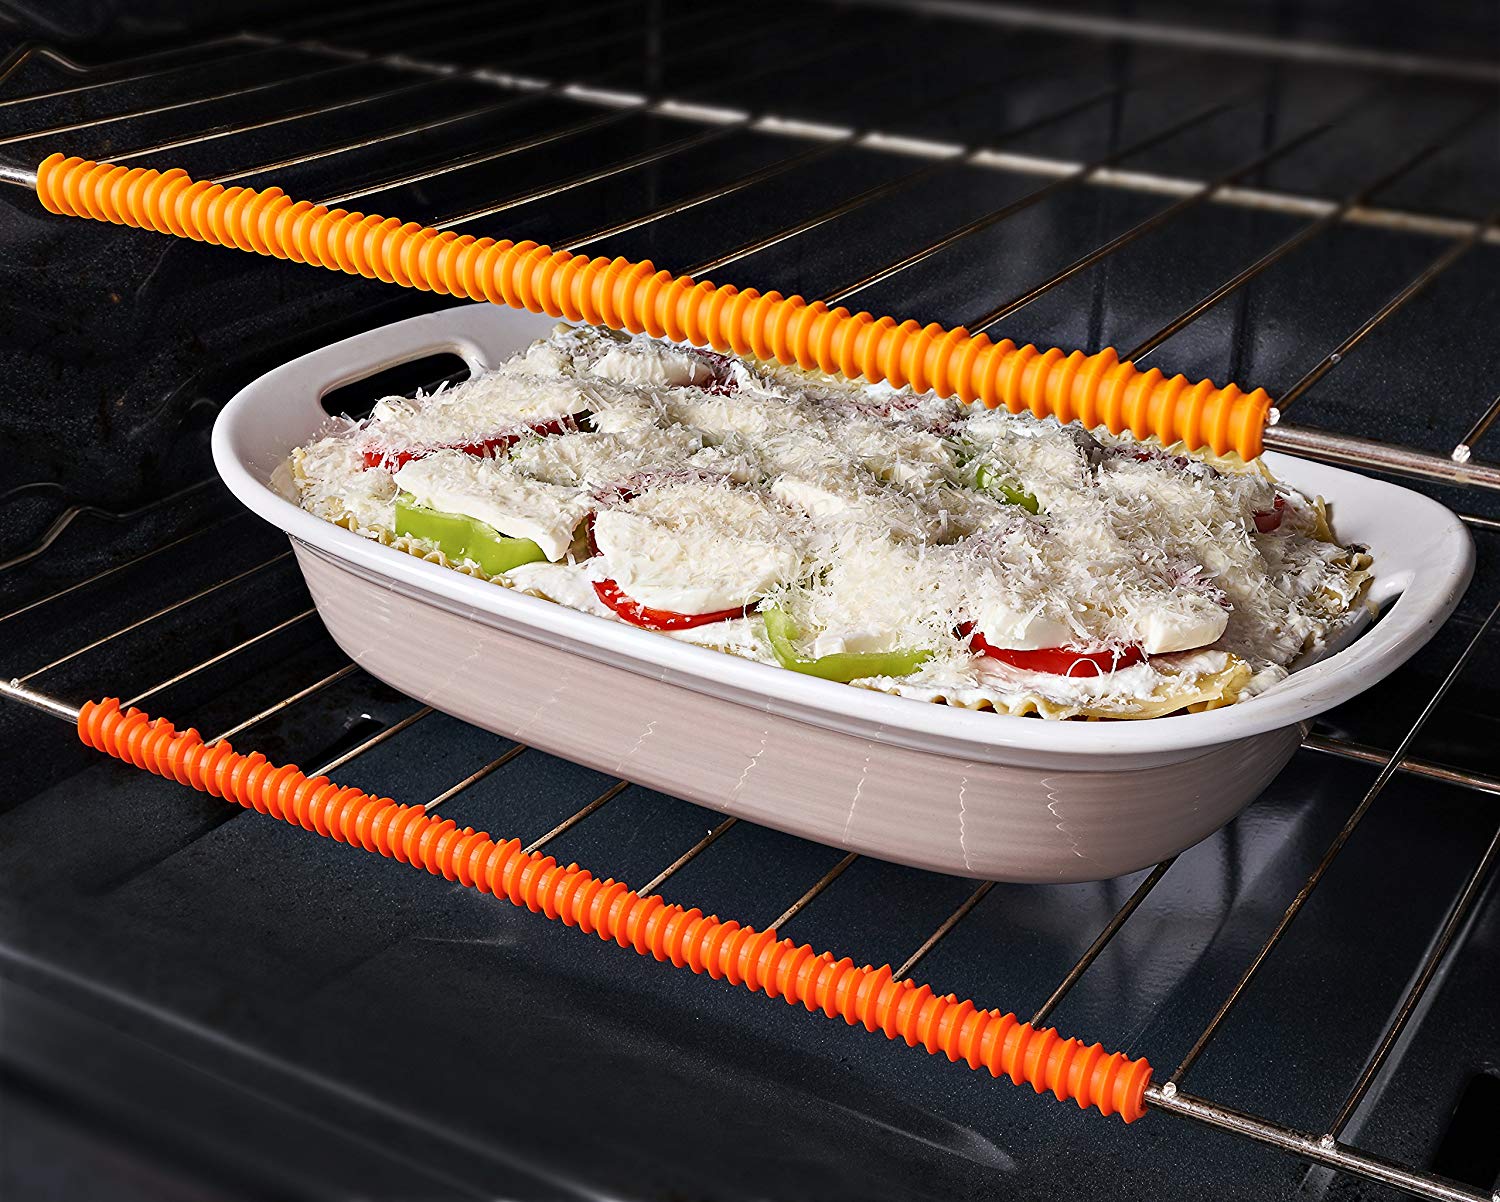 brightly colored silicone coils line the outfacing edge of oven racks with a casserole bubbling in the oven